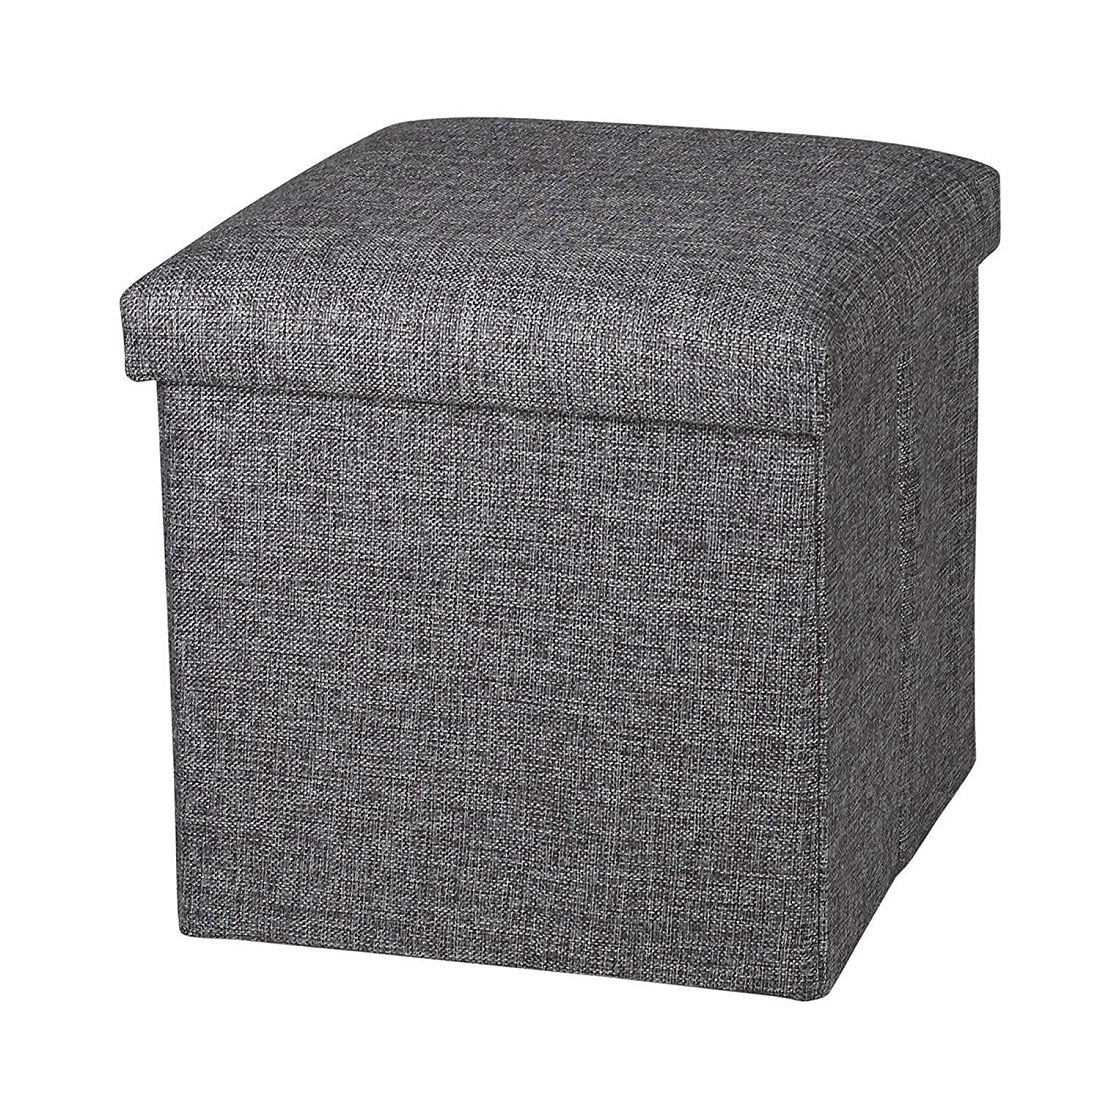     			EIGHTEEN ENTERPRISE Seating & Storage Stool Linen Small Coffee Table | Foot Rest Stool Seat | Folding Toys Chest Collapsible - Grey.